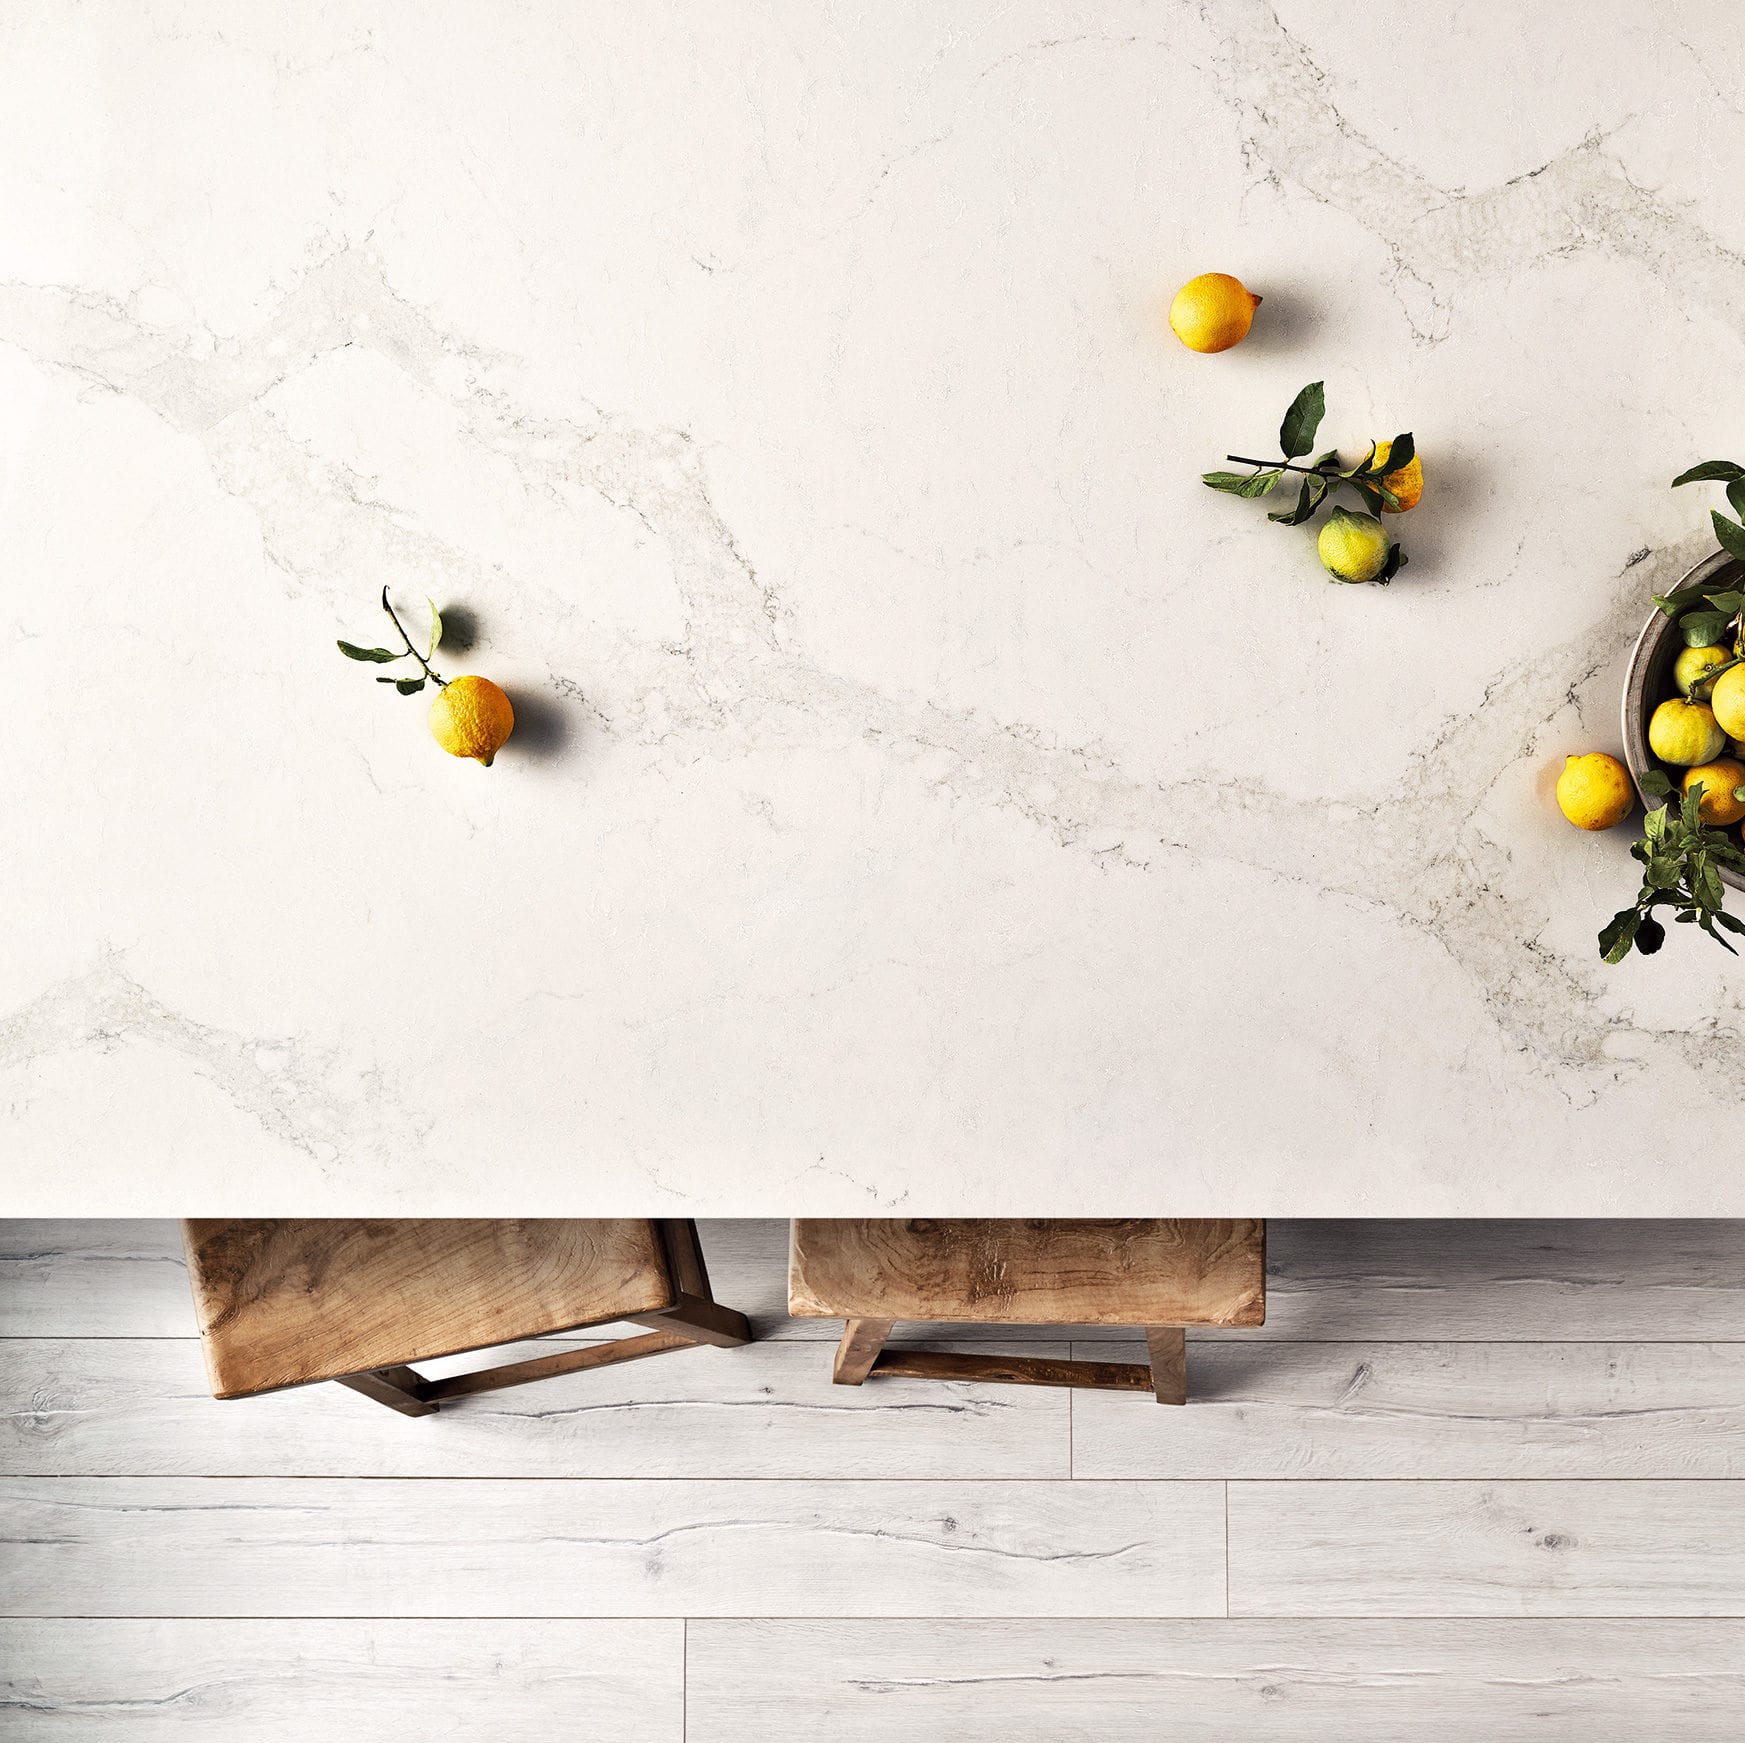 The beautiful details captured in a Caesarstone bench top